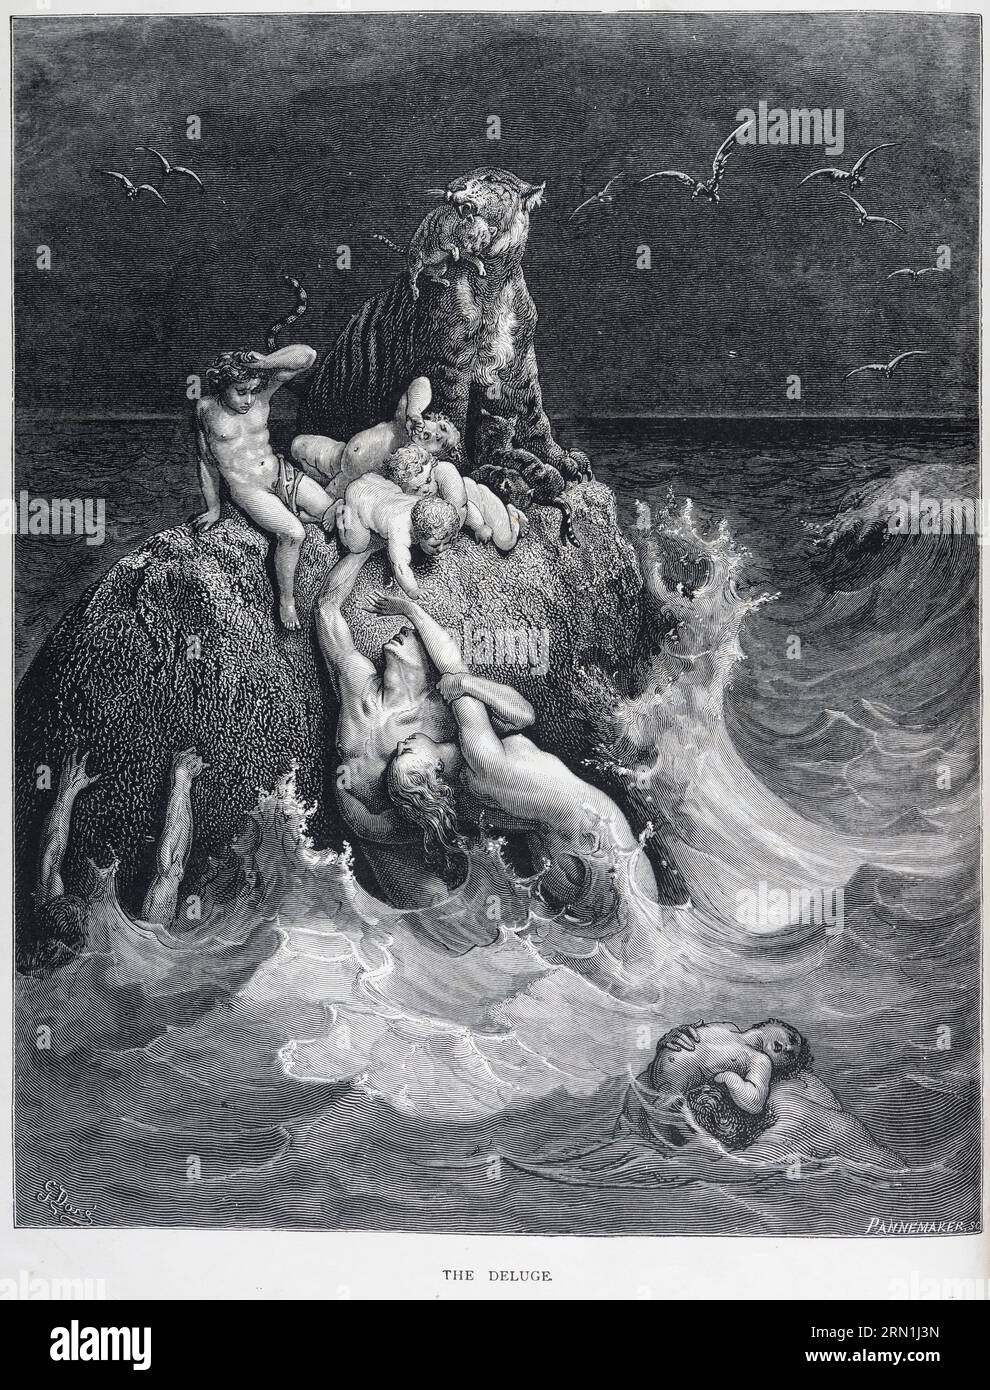 The Deluge, a wood engraving by Gustave Doré, from his 1866 illustrated version of the King James Bible, first published in France as La Grande Bible de Tours. The illustration shows people and animals attempting to survive the flood described in the Book of Genesis, sent by God as a punishment for the wickedness of mankind Stock Photo